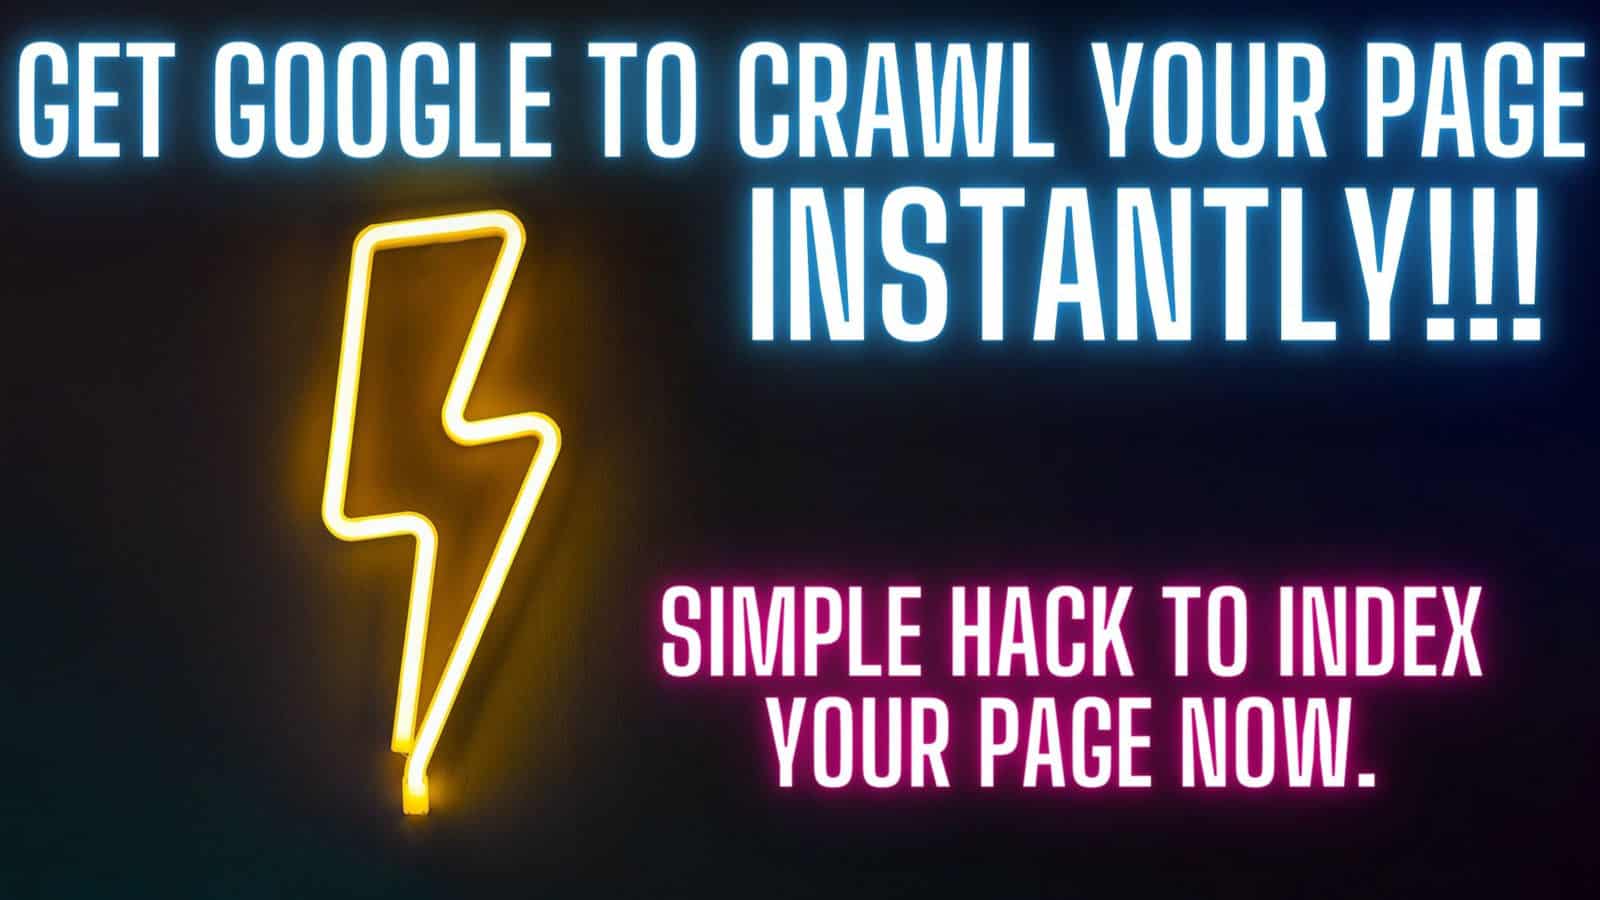 Get Google to crawl your page instantly